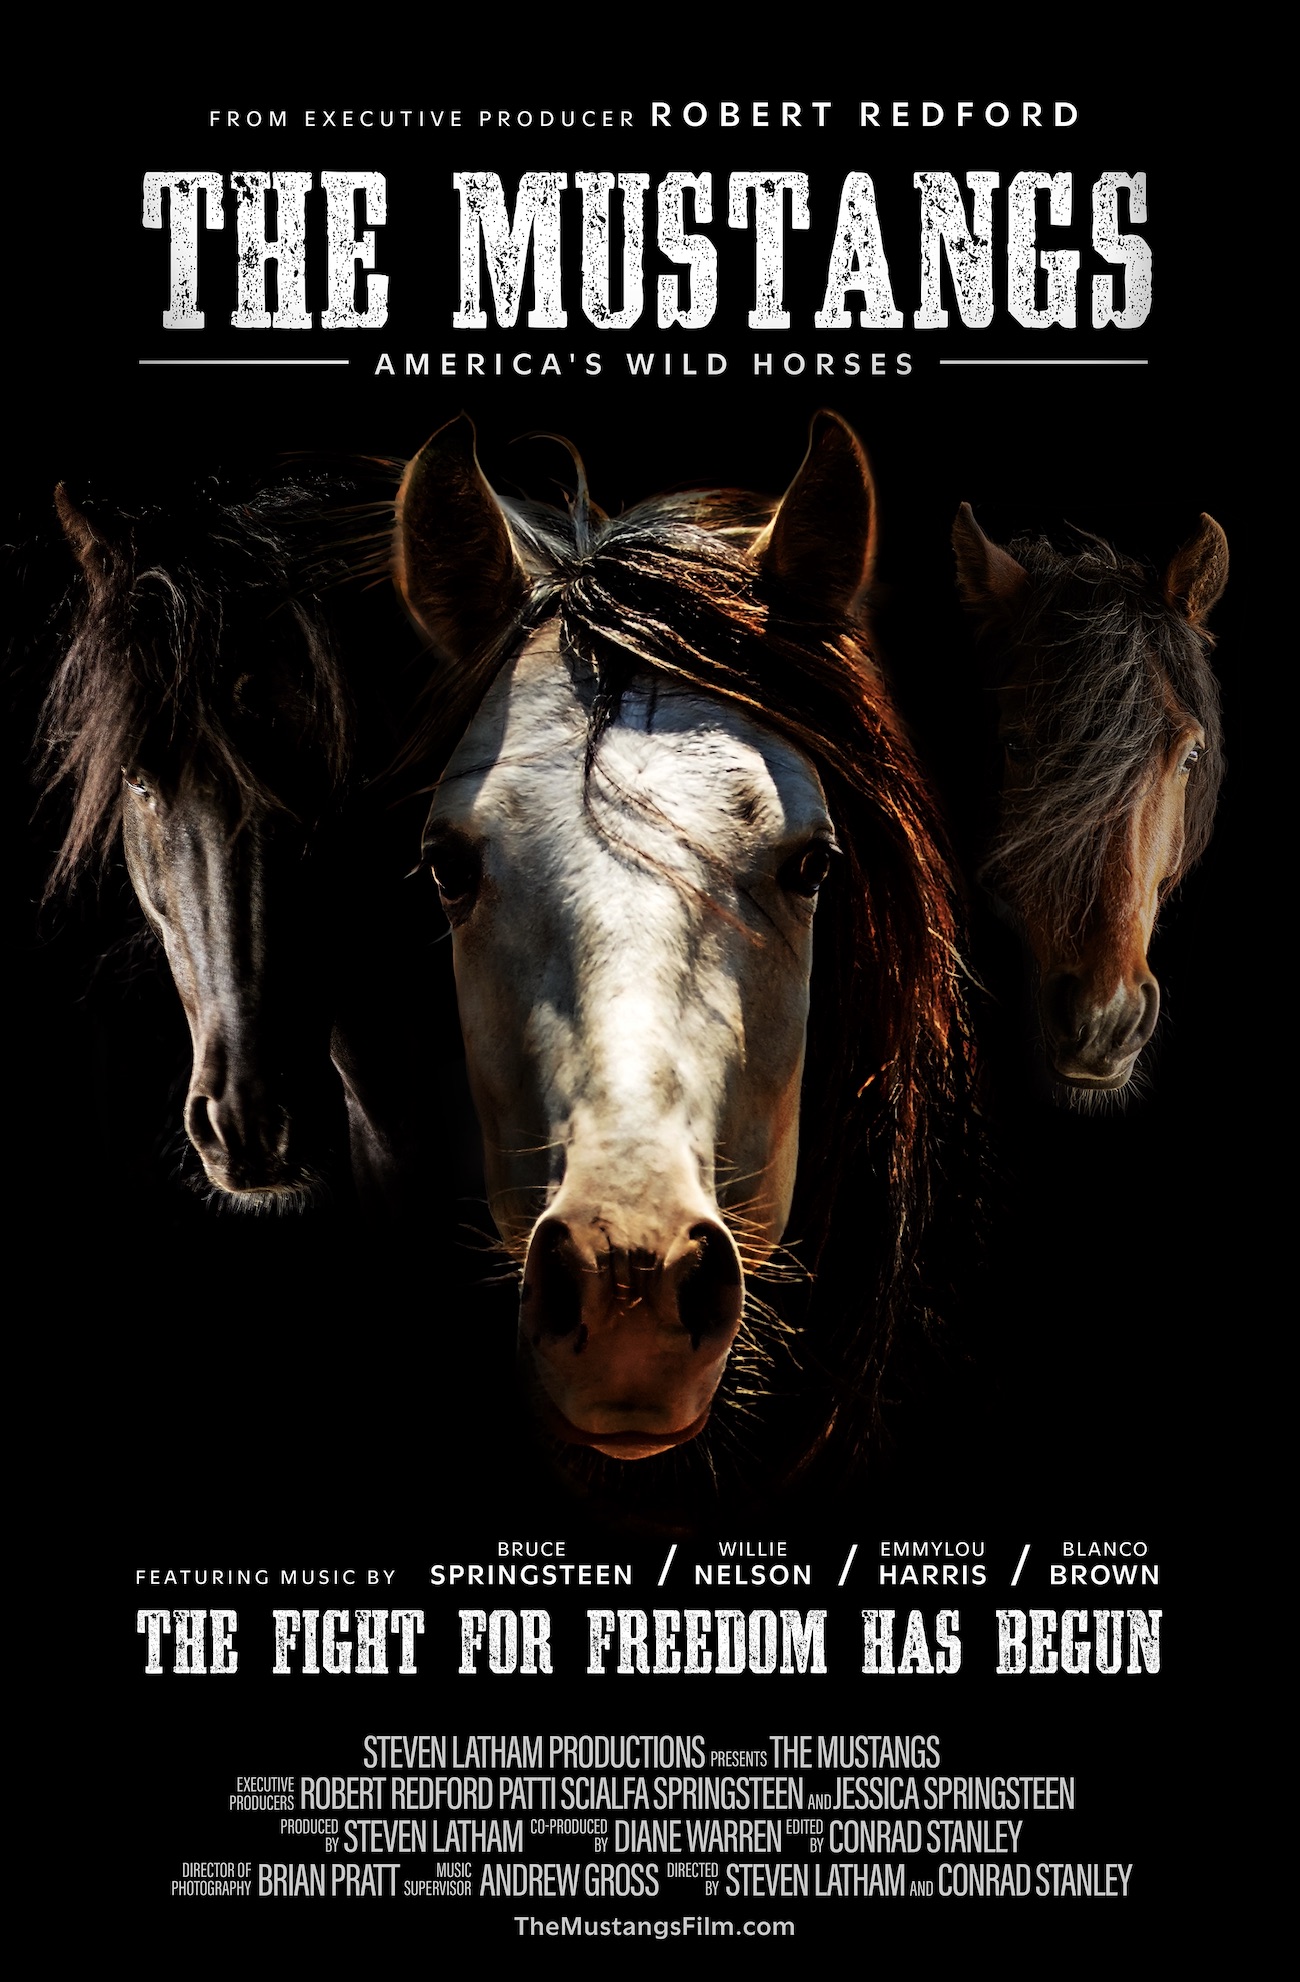 Documentary film “The Mustangs: America’s Wild Horses” opens nationwide